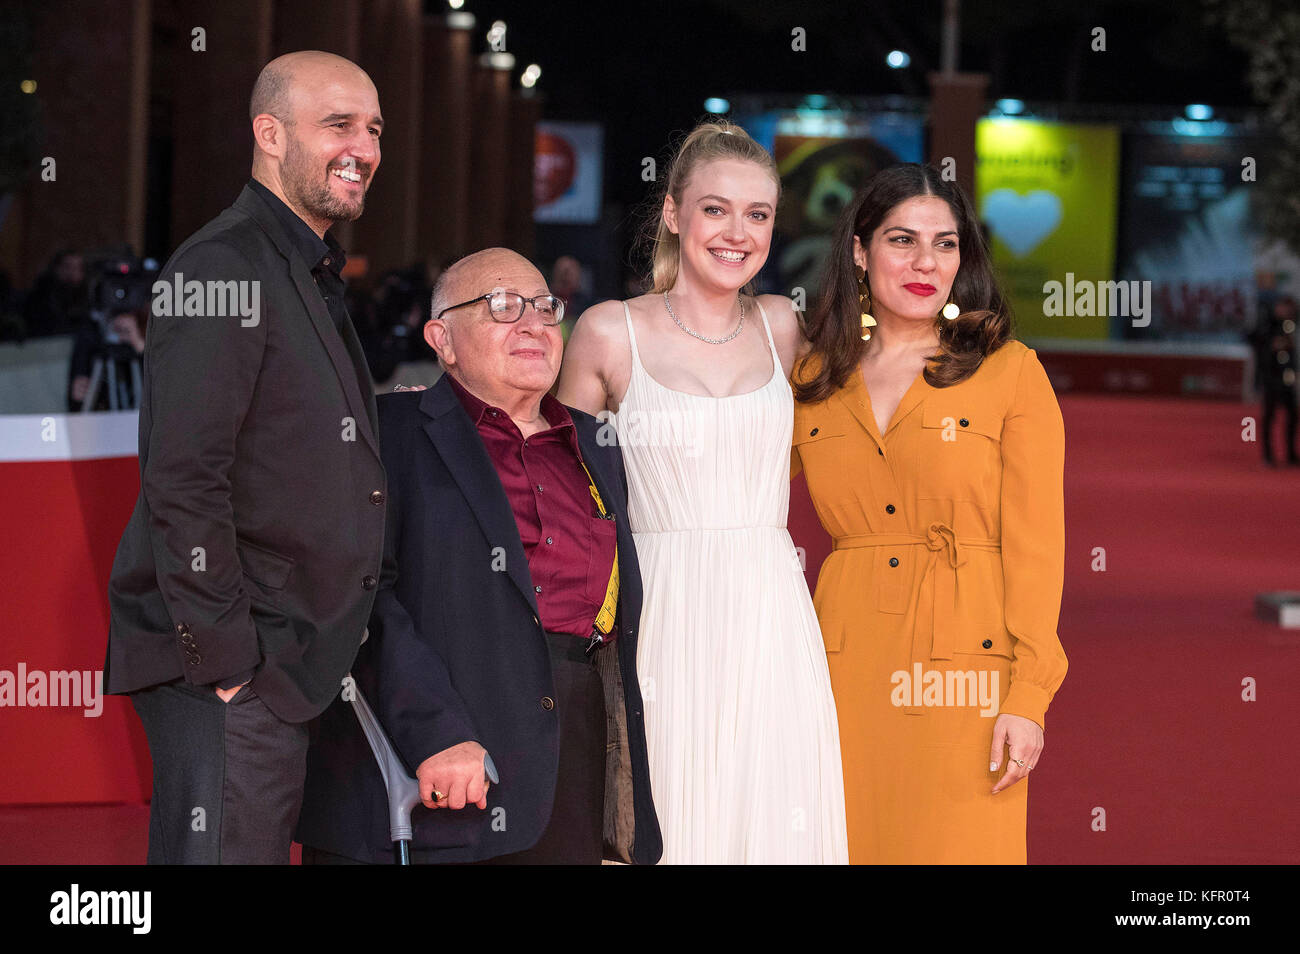 Daniel Lubiecki, Ben Lewin, Dakota Fanning and Lara Alamaddine attend the 'Please Stand By' premiere during the 12th Rome Film Fest at Auditorium Parco Della Musica on October 31, 2017 in Rome, Italy. Stock Photo